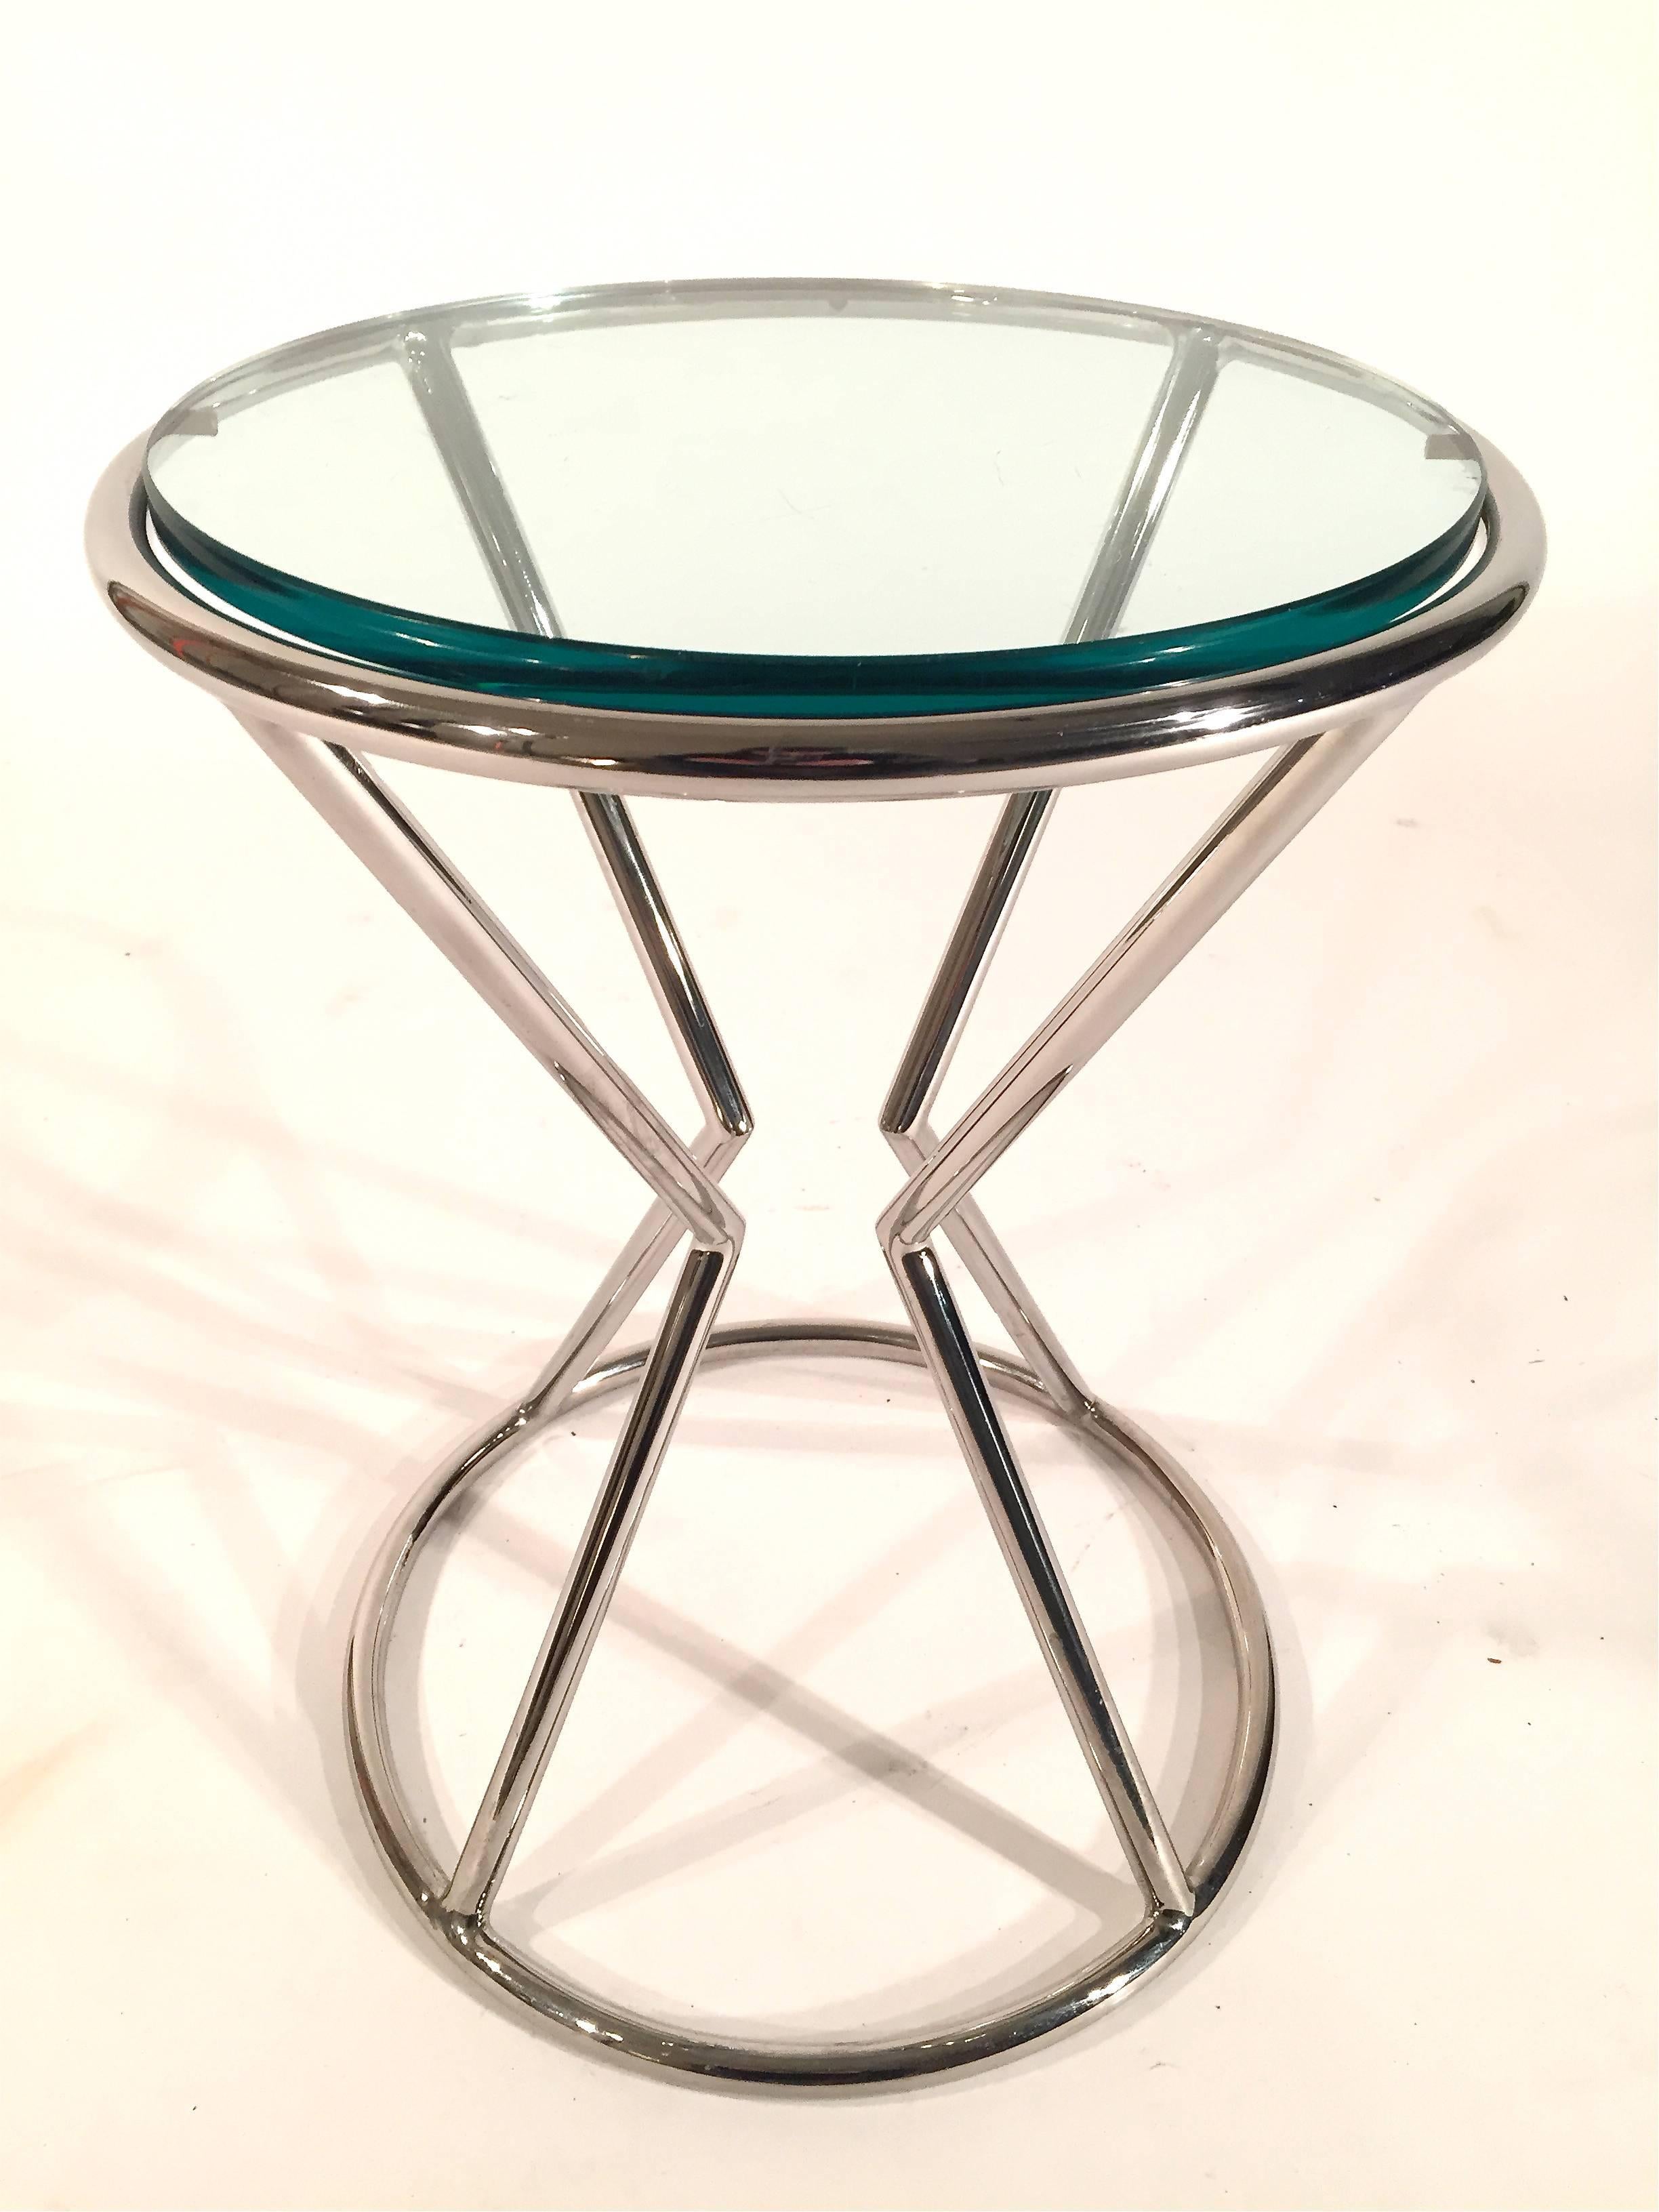 Pace collection chrome and glass drinks table, Italian, 1980s.